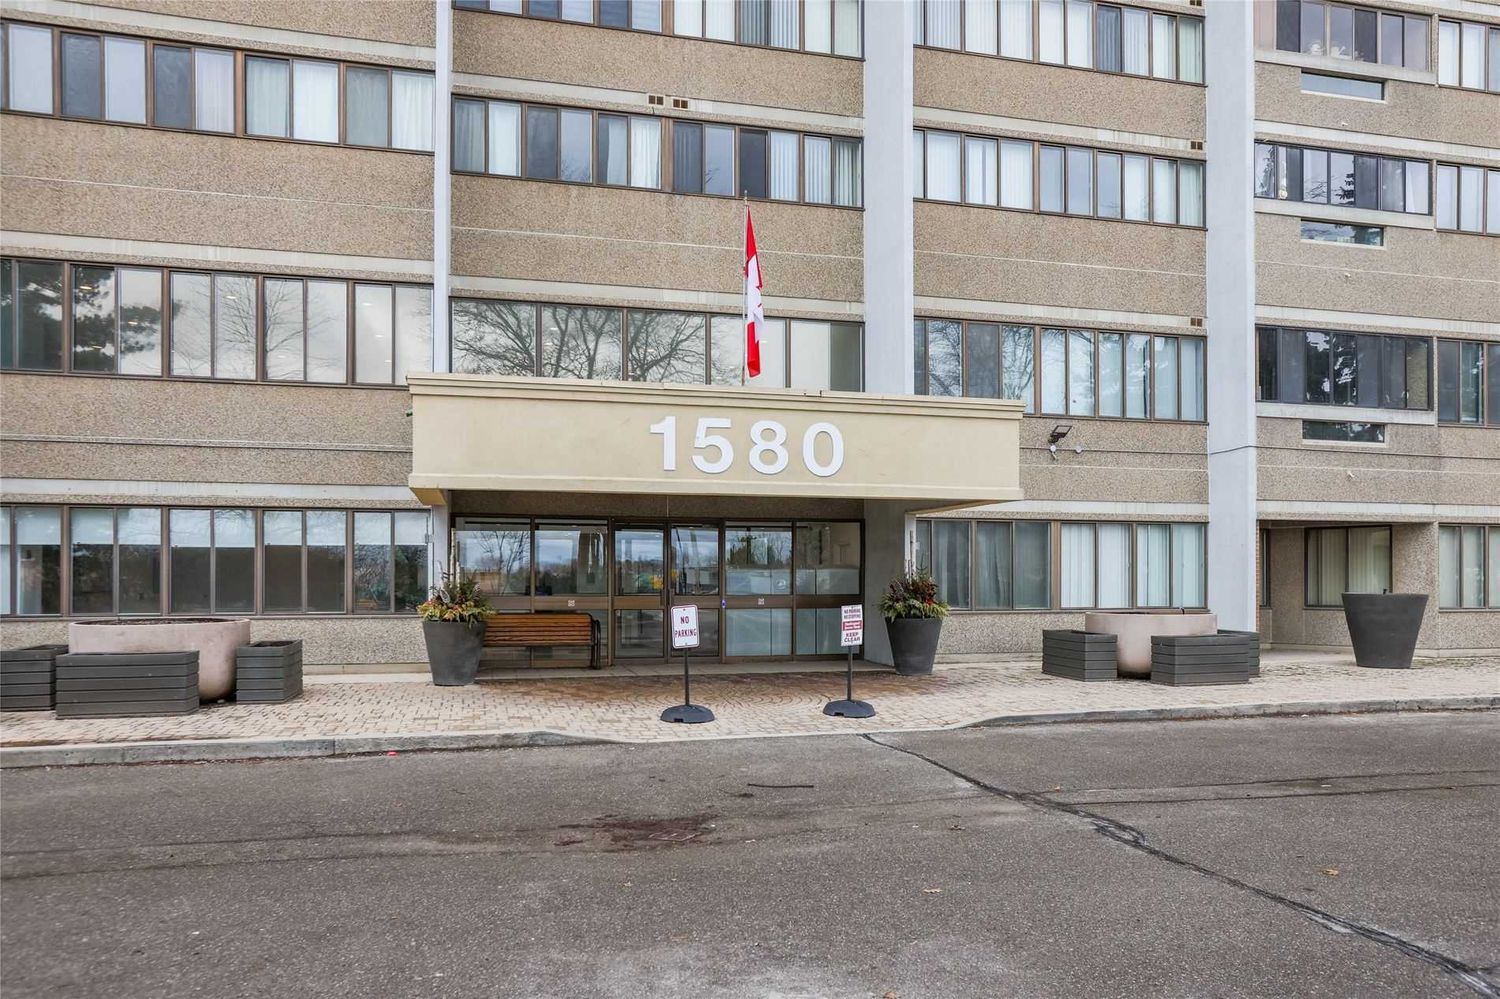 1580 Mississauga Valley Boulevard. Parkview Condos is located in  Mississauga, Toronto - image #3 of 3